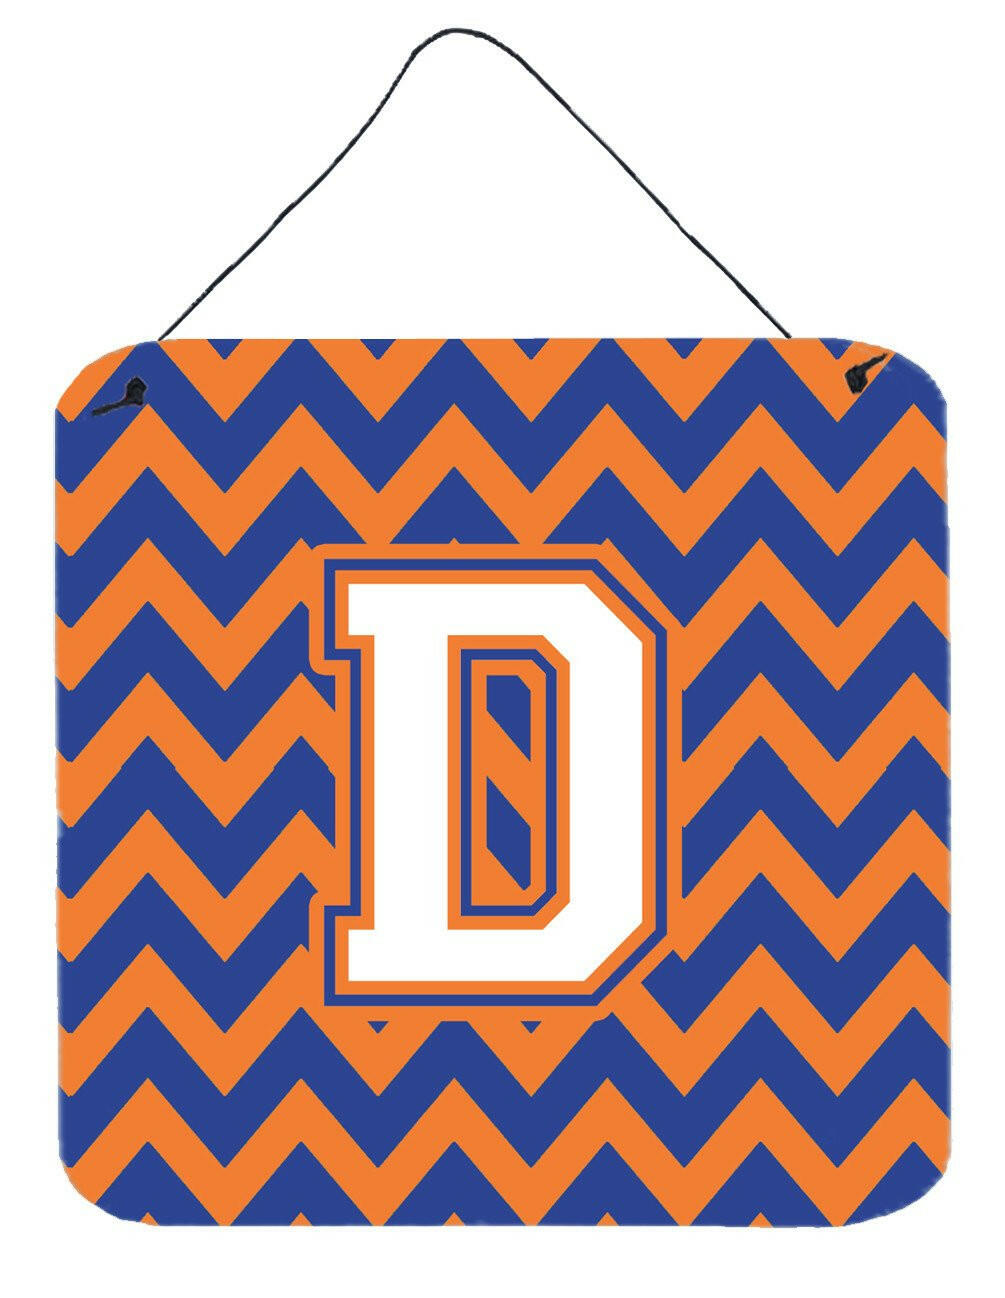 Letter D Chevron Blue and Orange #3 Wall or Door Hanging Prints CJ1060-DDS66 by Caroline's Treasures